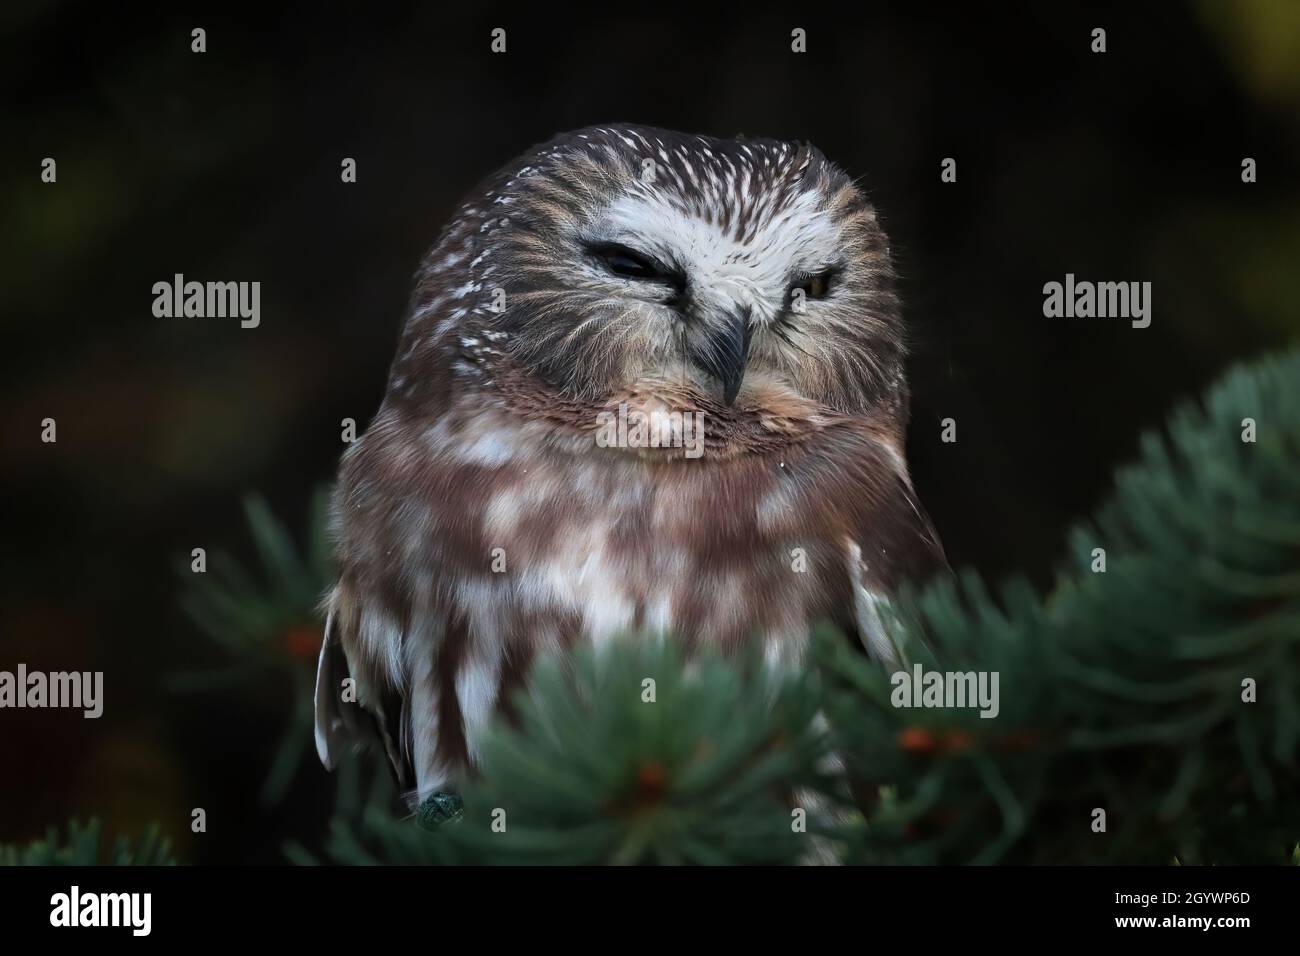 Portrait of a Northern Saw Whet Owl in a tree Stock Photo